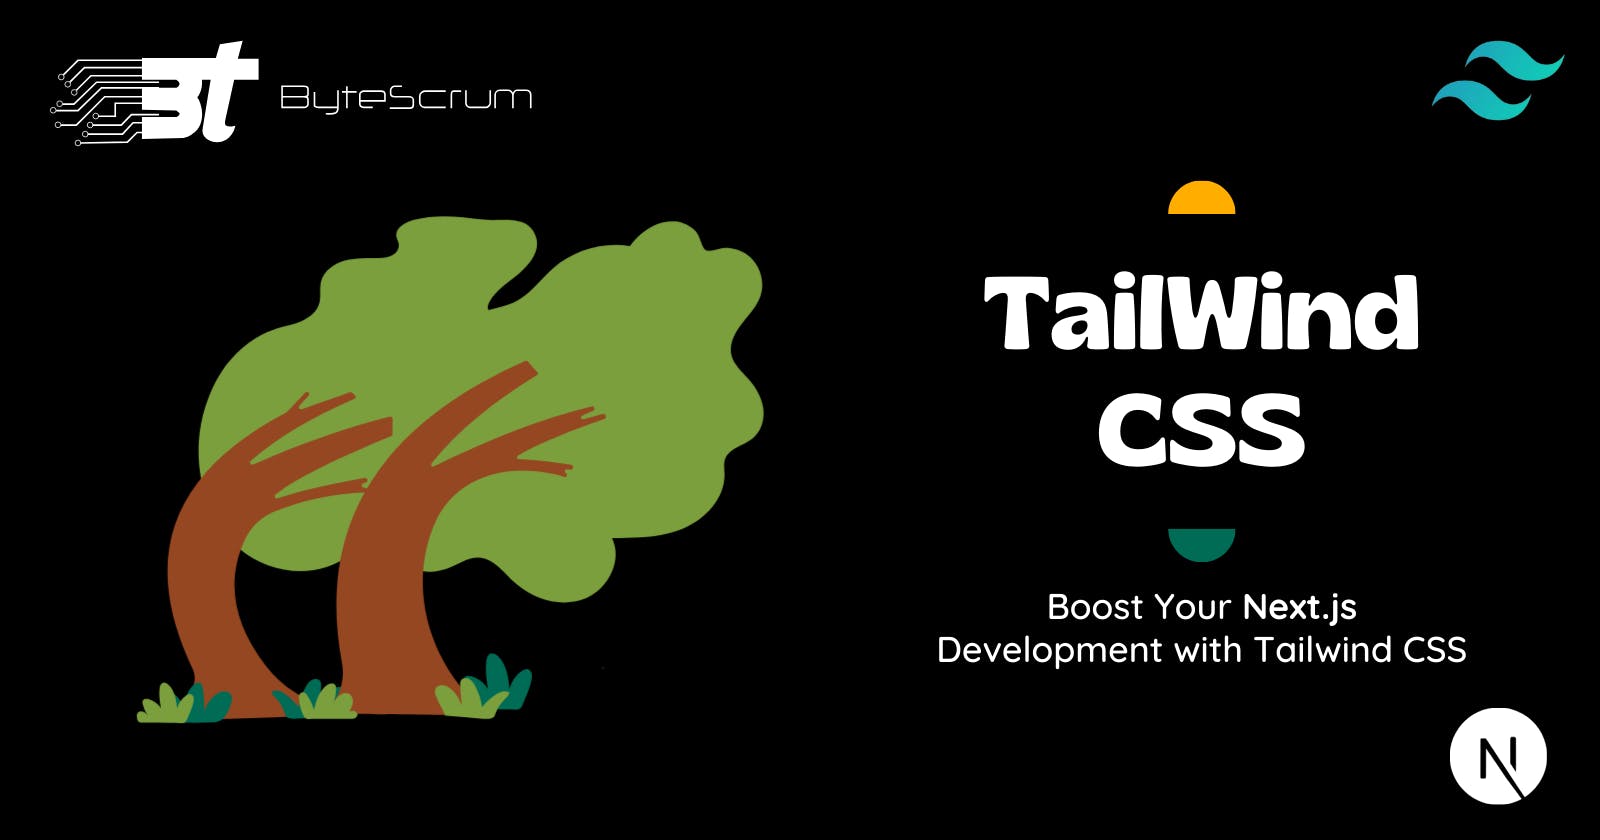 Using Tailwind CSS with Next.js for Rapid UI Development